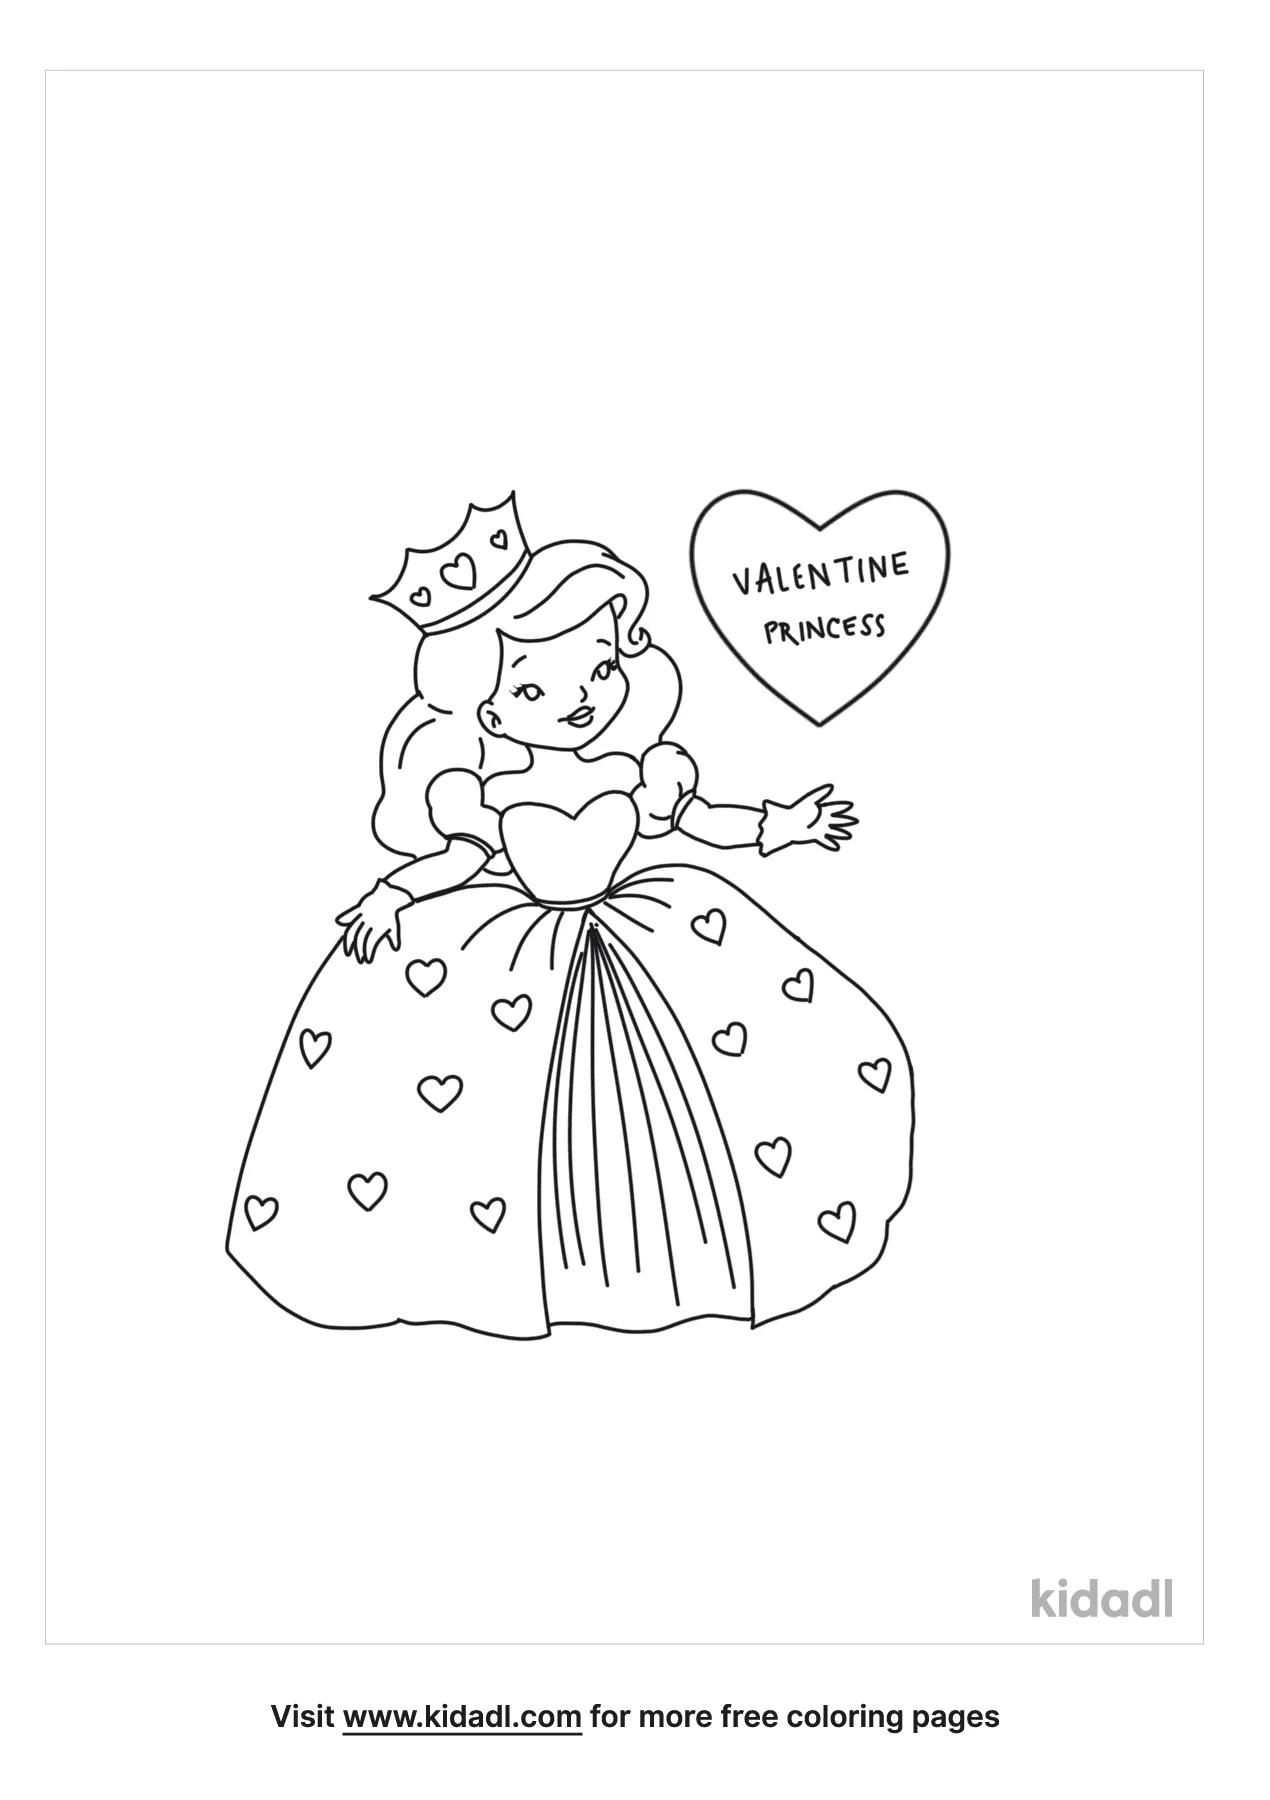 Valentine's Day Princess Coloring Page